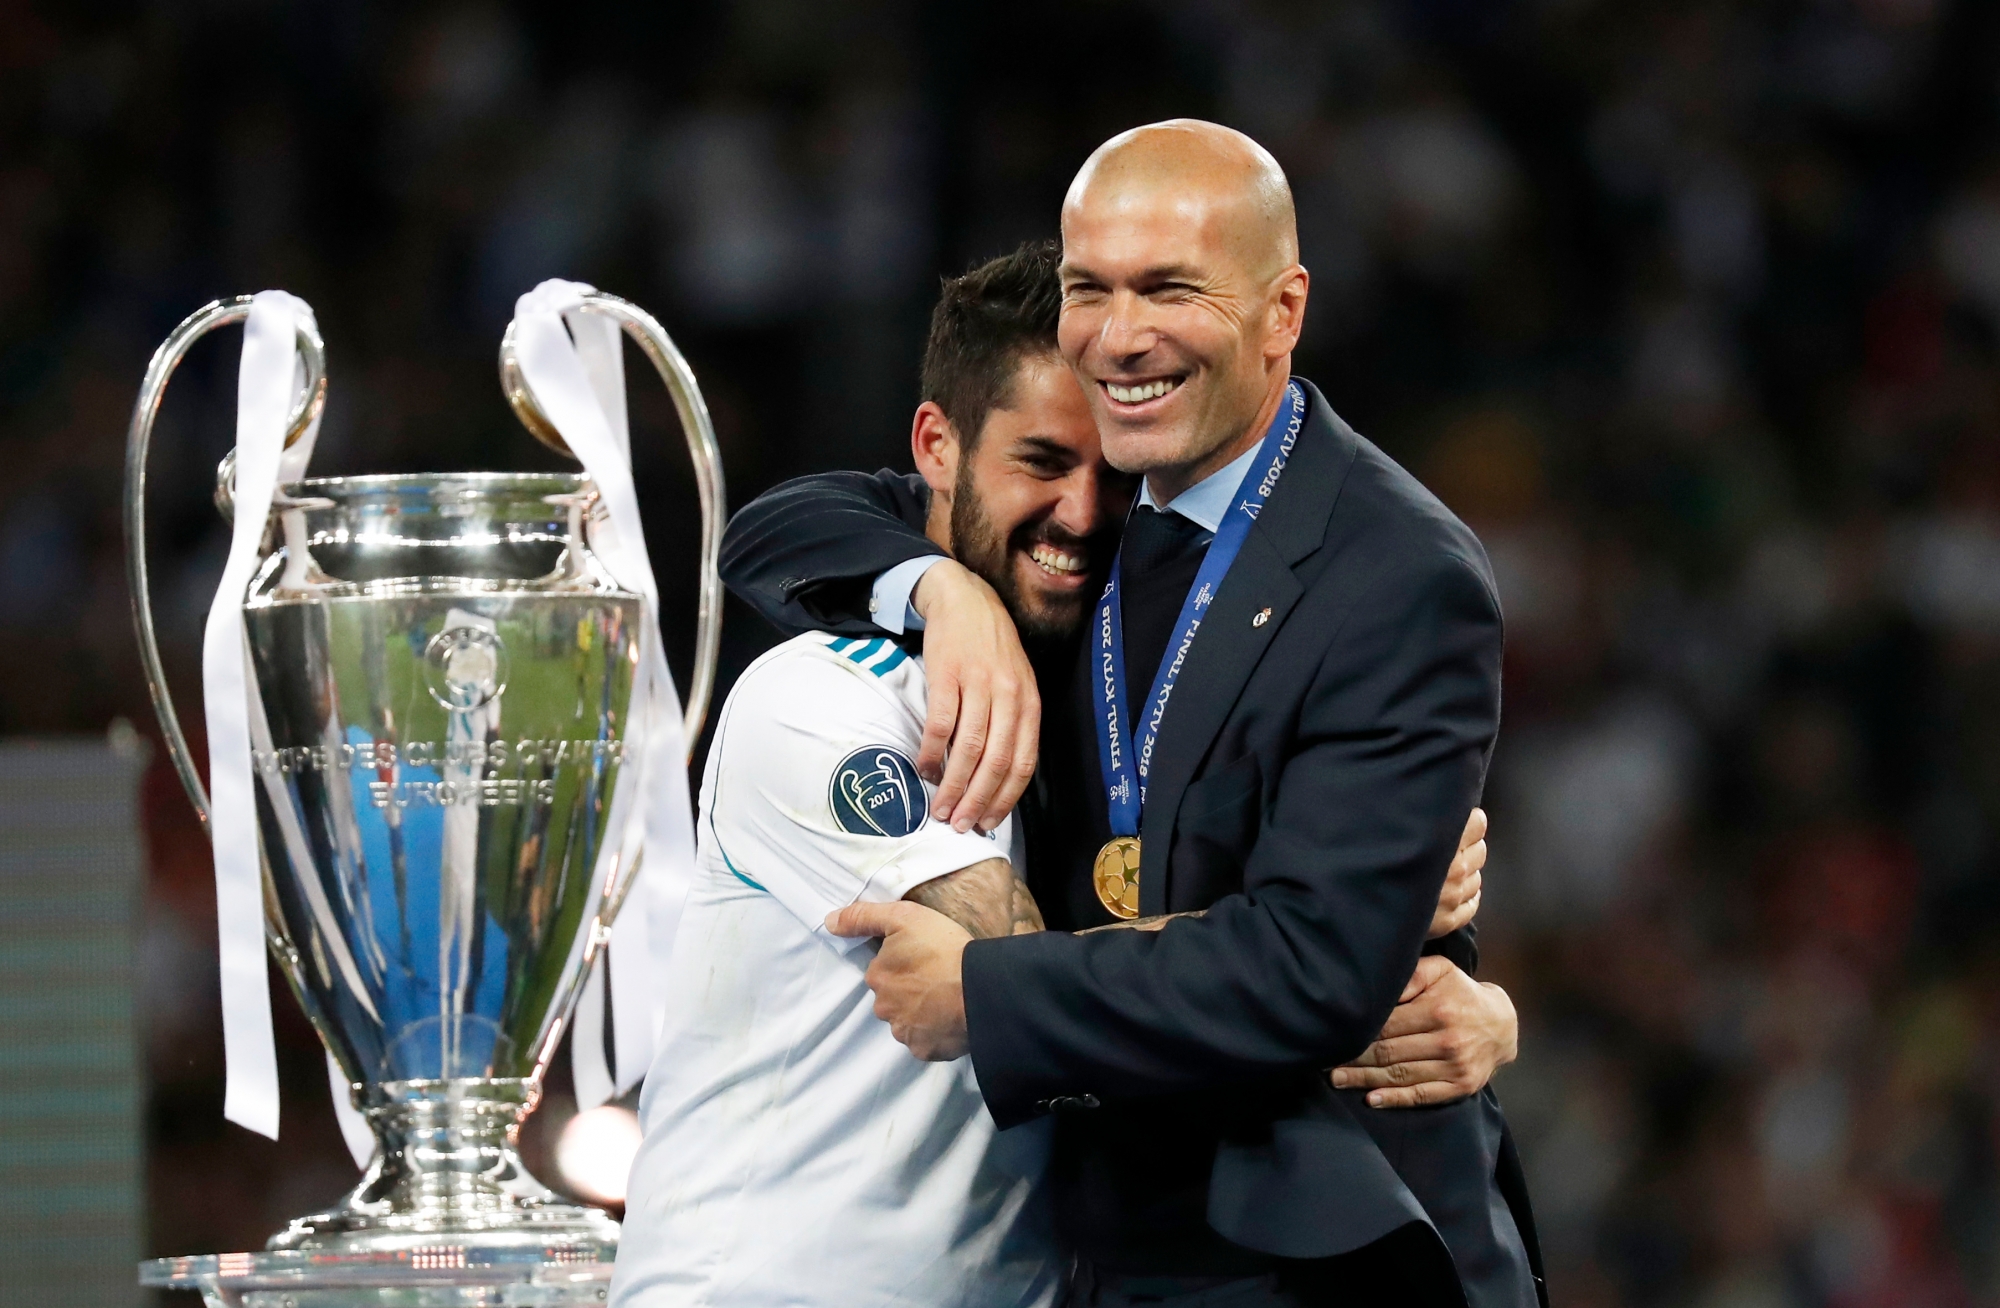 Real Madrid's Isco hugs coach Zinedine Zidane, right, after winning the Champions League Final soccer match between Real Madrid and Liverpool at the Olimpiyskiy Stadium in Kiev, Ukraine, Saturday, May 26, 2018. (AP Photo/Pavel Golovkin) Ukraine Soccer Champions League Final